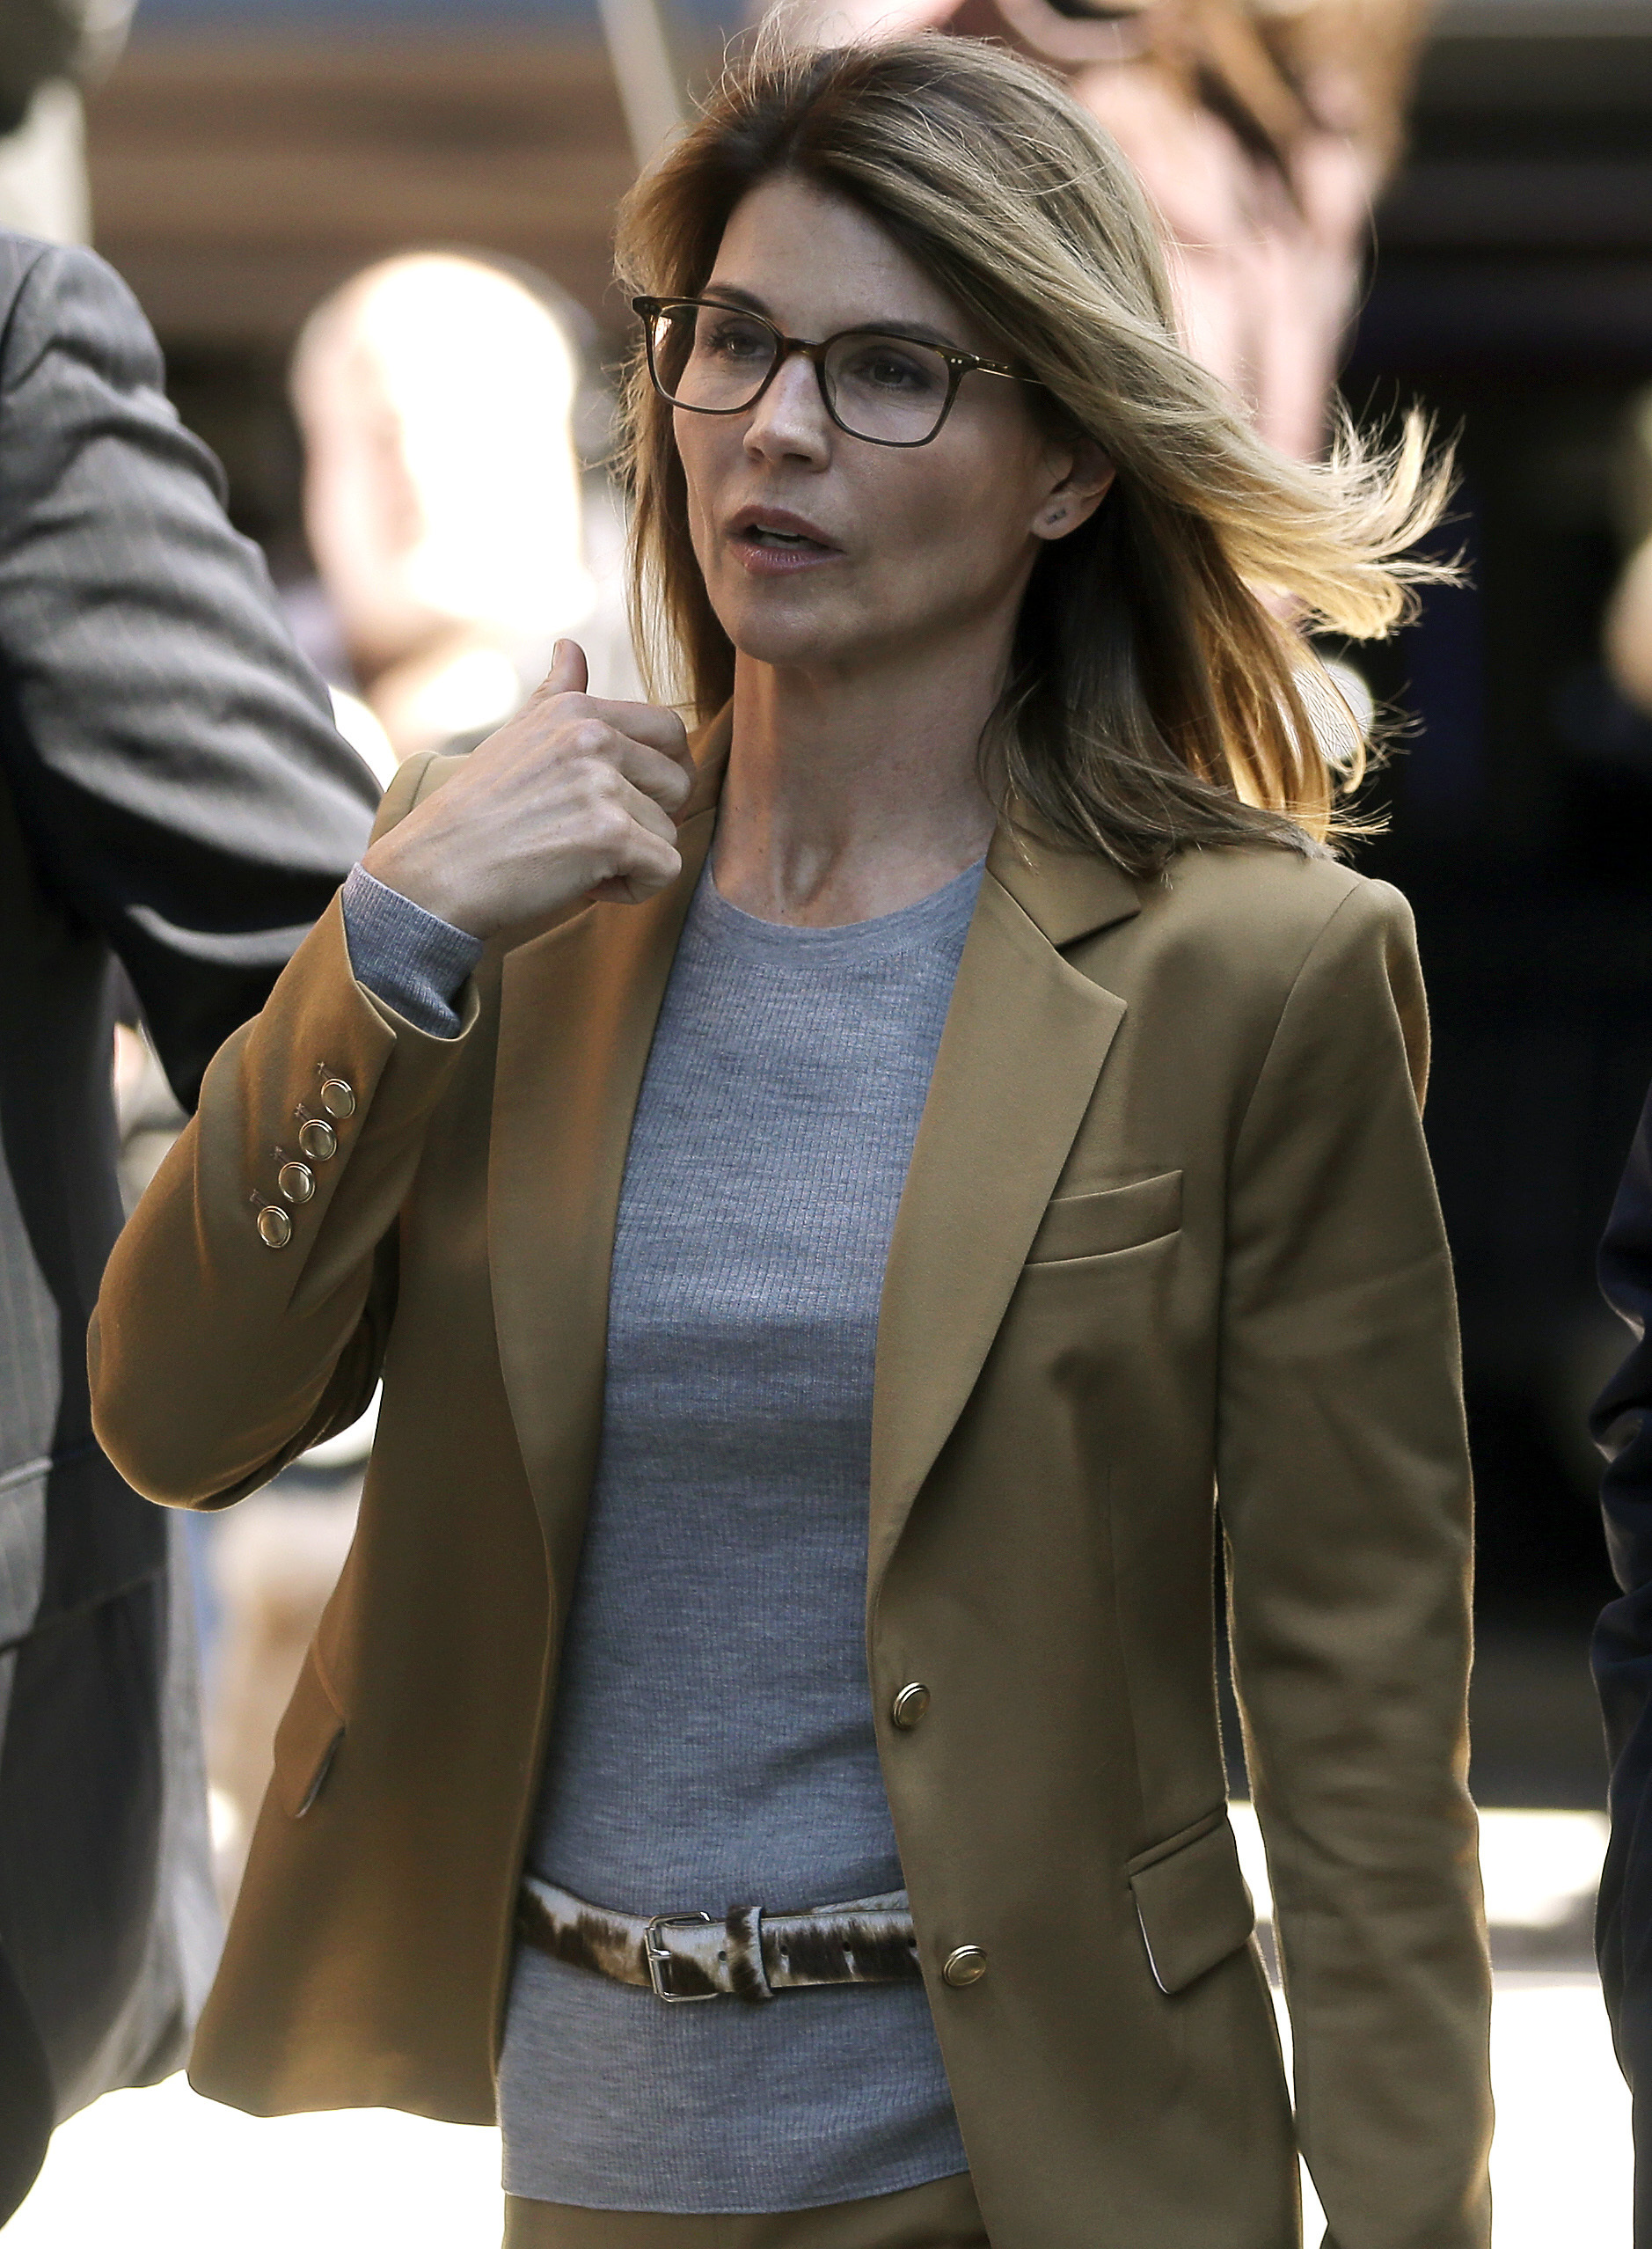 Lori Loughlin arrives at federal court in Boston on Wednesday, April 3, 2019, to face charges in a nationwide college admissions bribery scandal. (Steven Senne—AP)